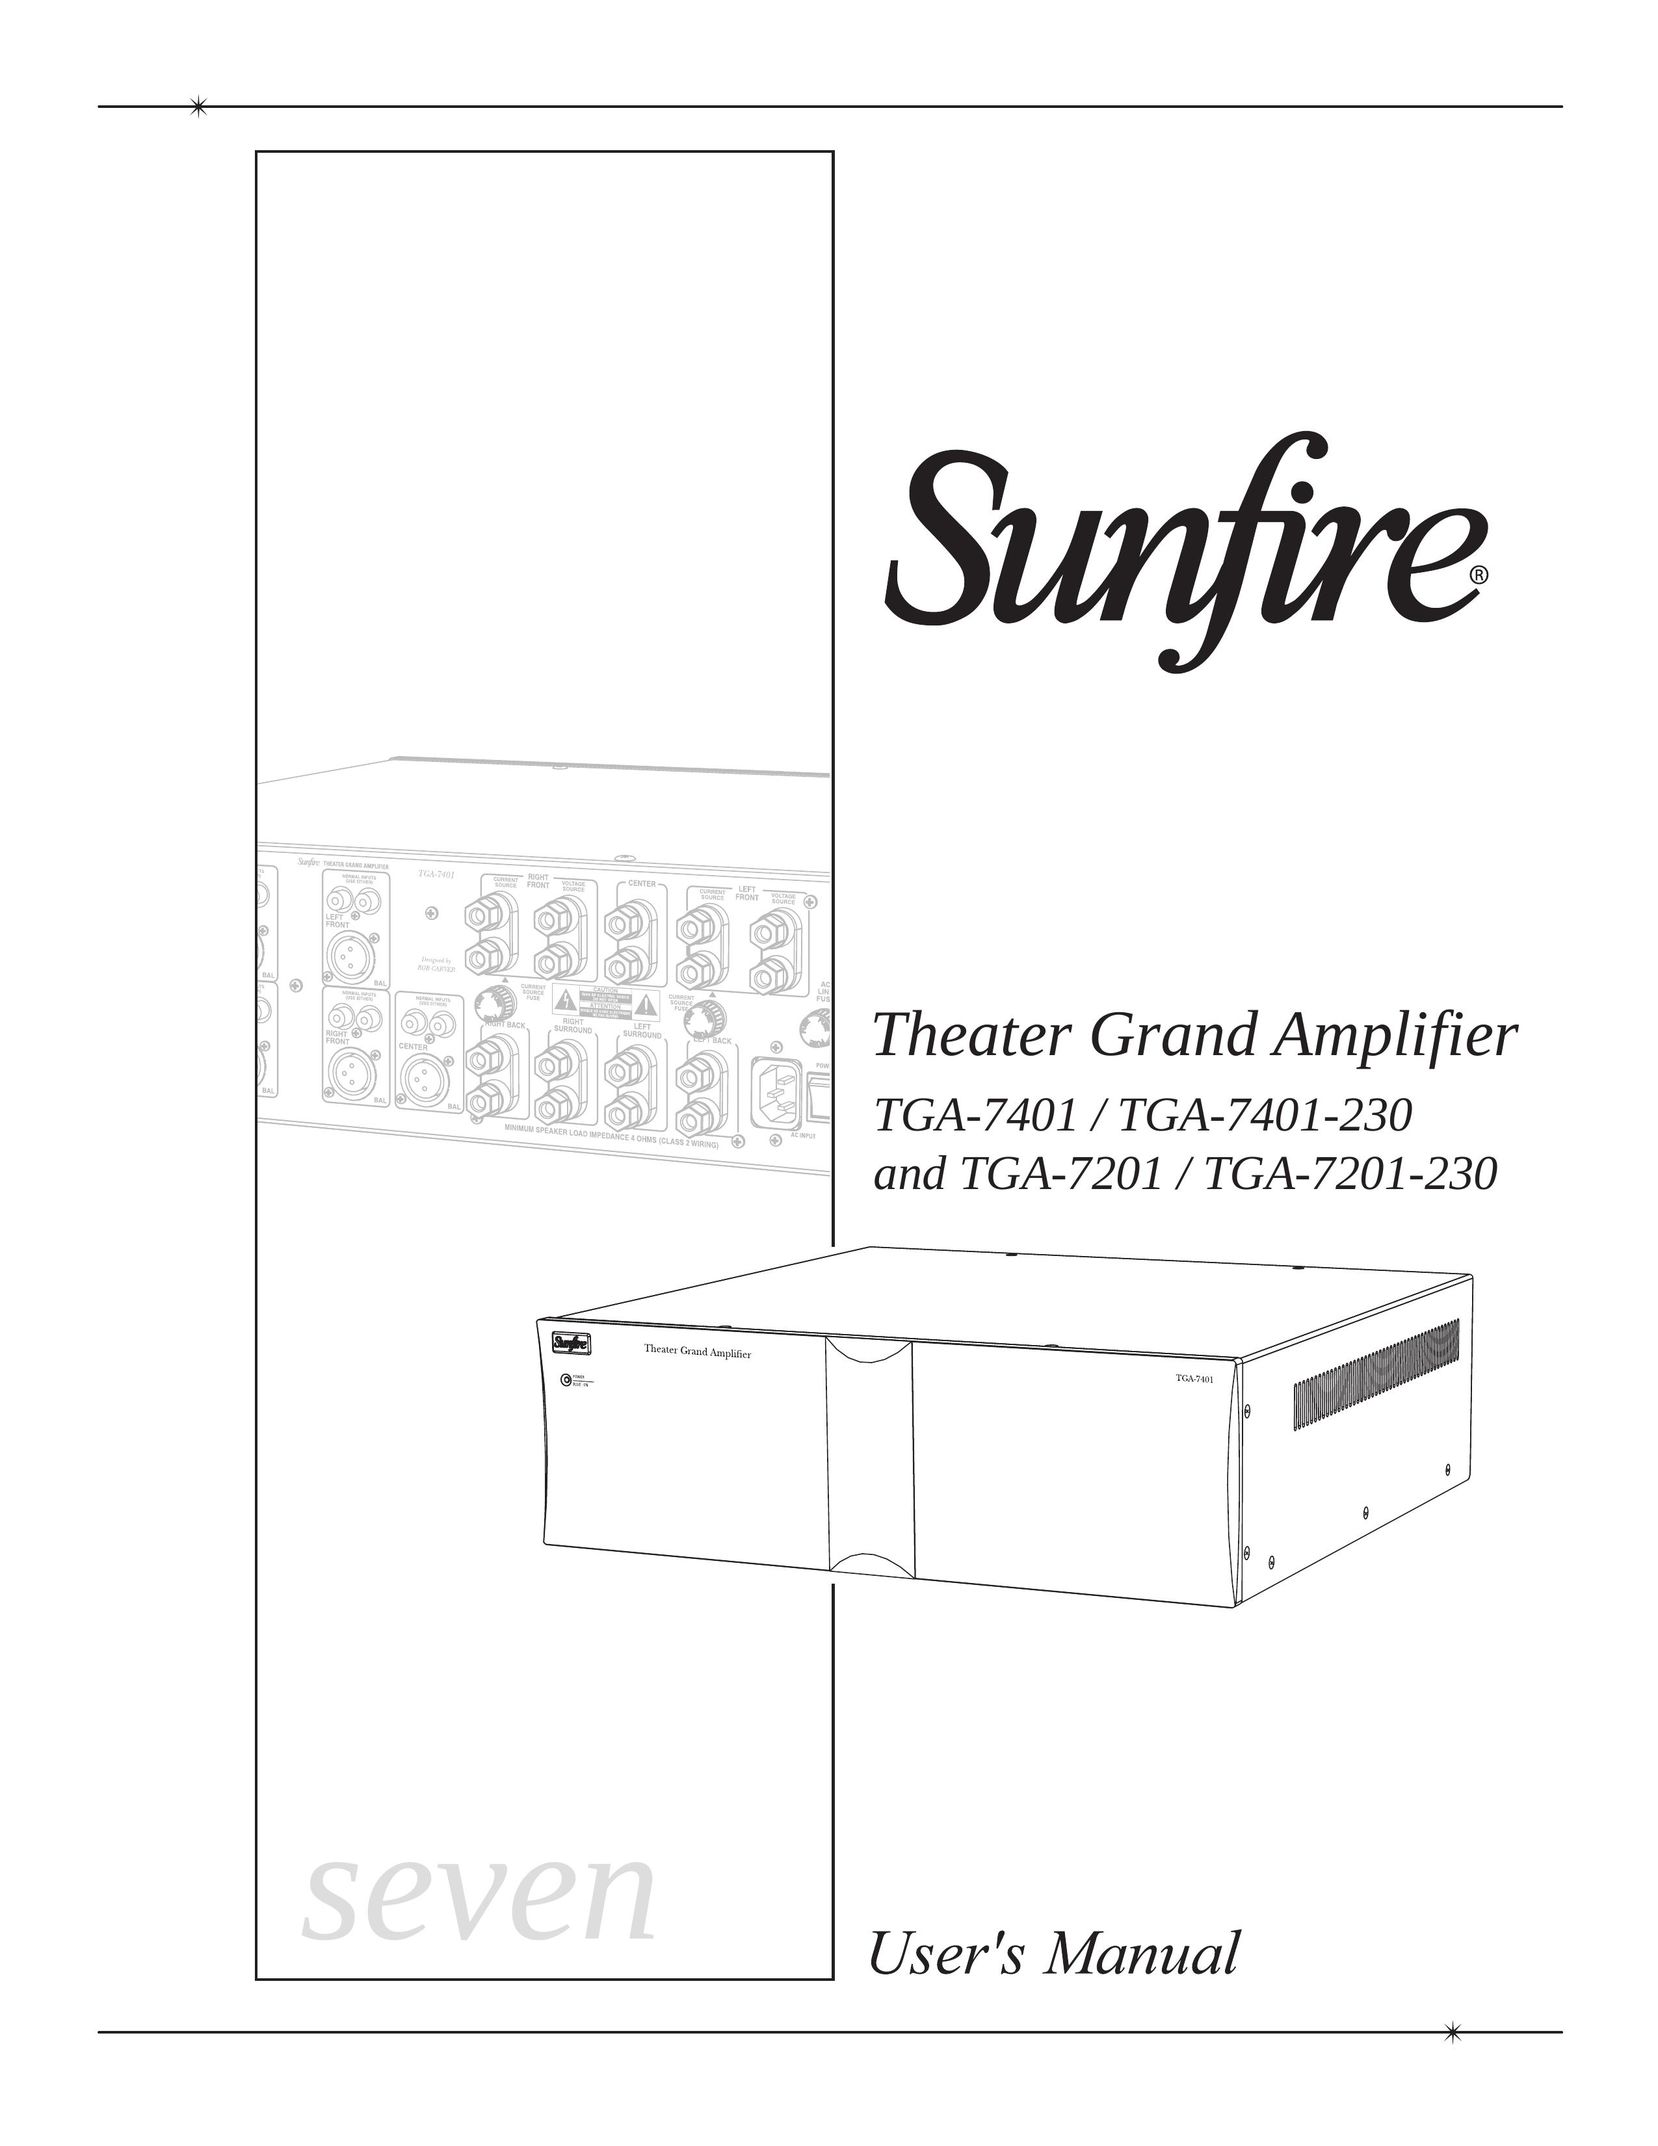 Sunfire TGA-7401-230 Home Theater System User Manual